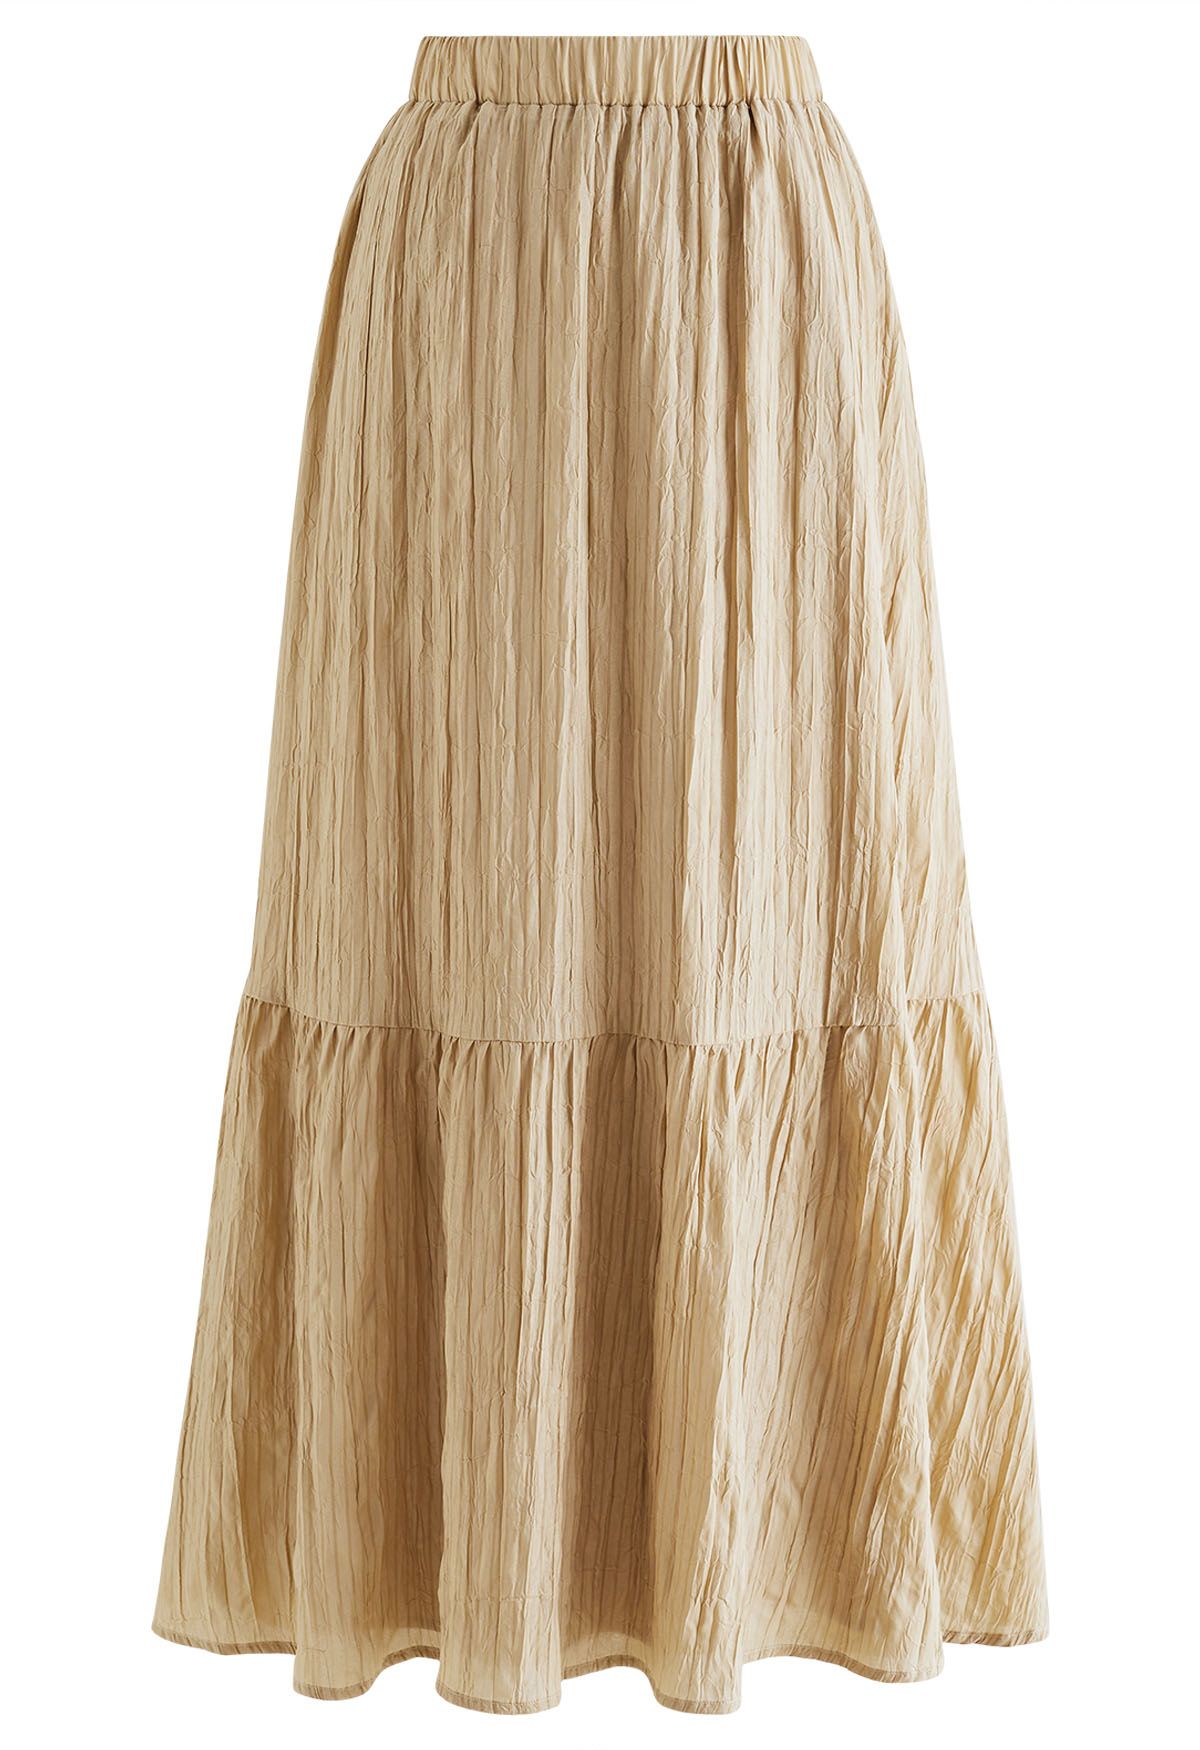 Striped Halter Top and Frilling Maxi Skirt Set in Light Tan